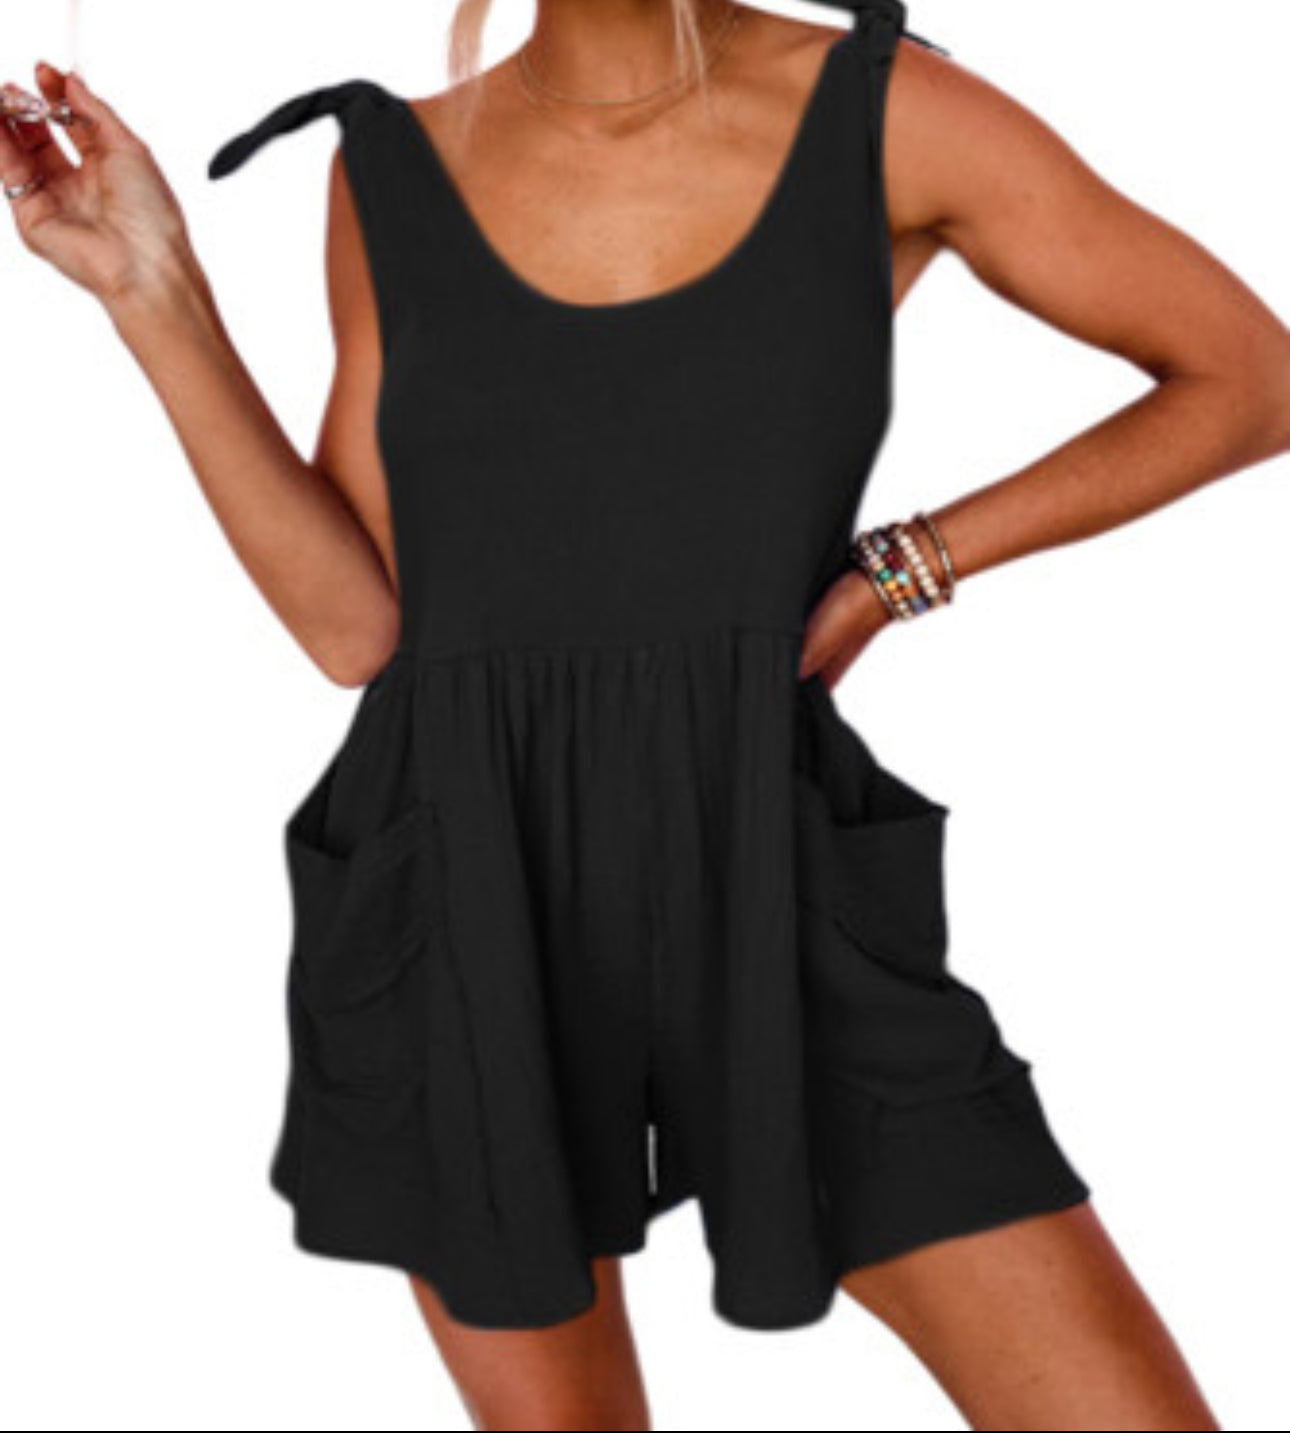 Black high waisted, knotted romper